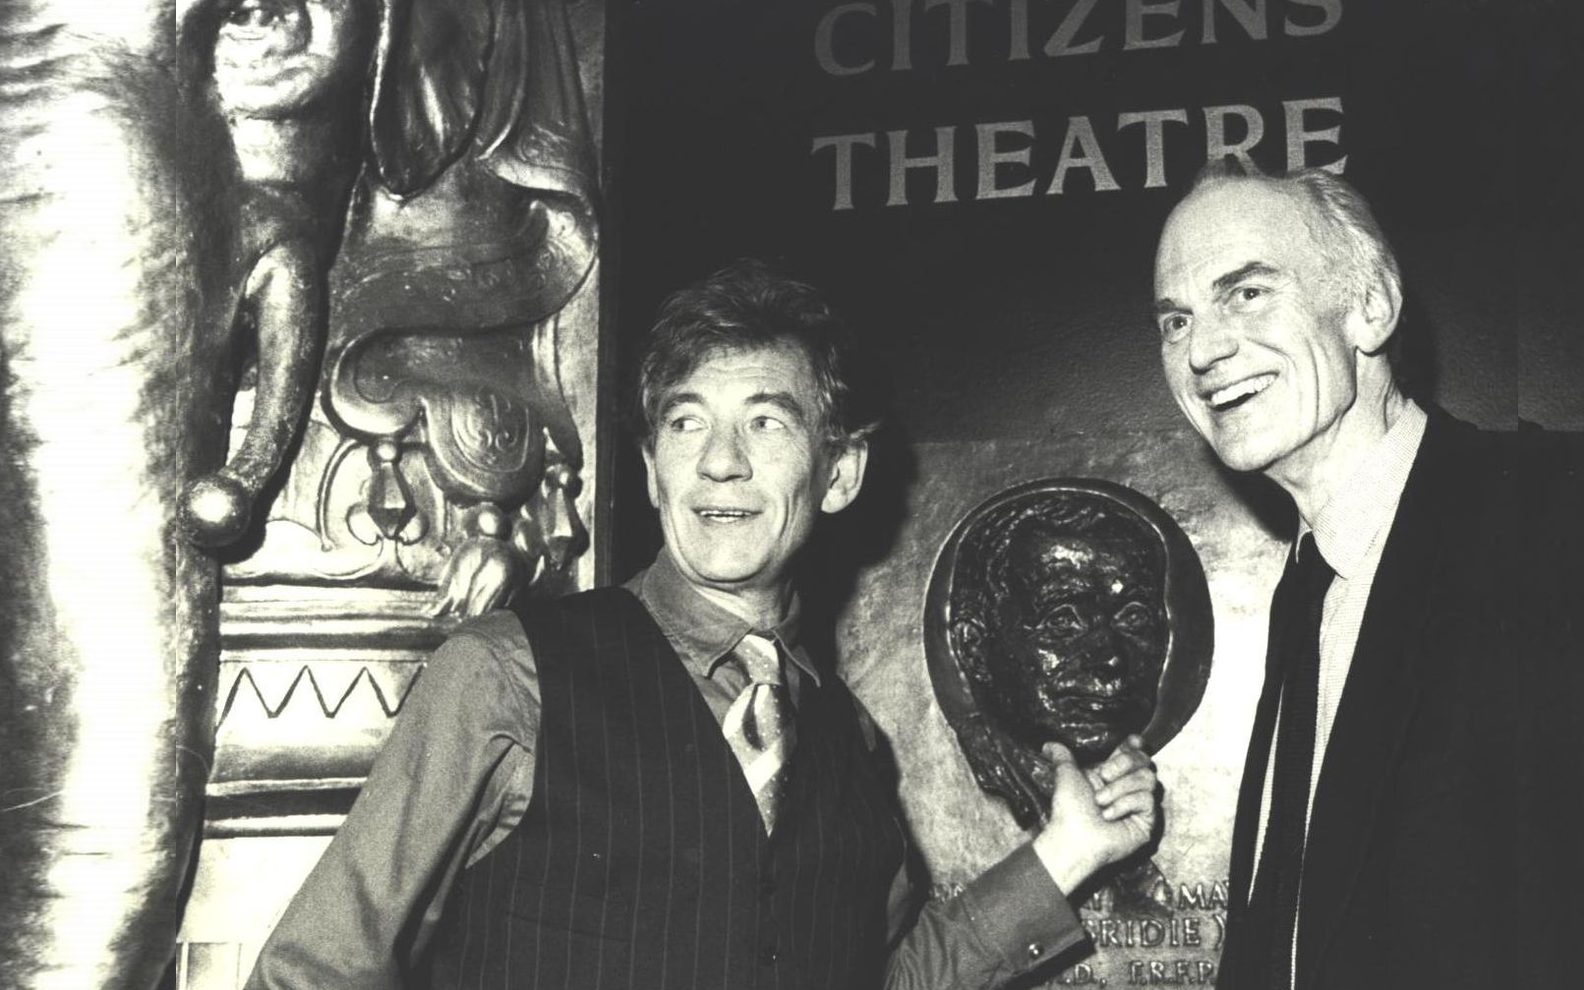 Sir Ian McKellen and Giles Havergal pose in the Citizens Theatre lobby. The name of the theatre and a plaster elephant head are seen behind them.